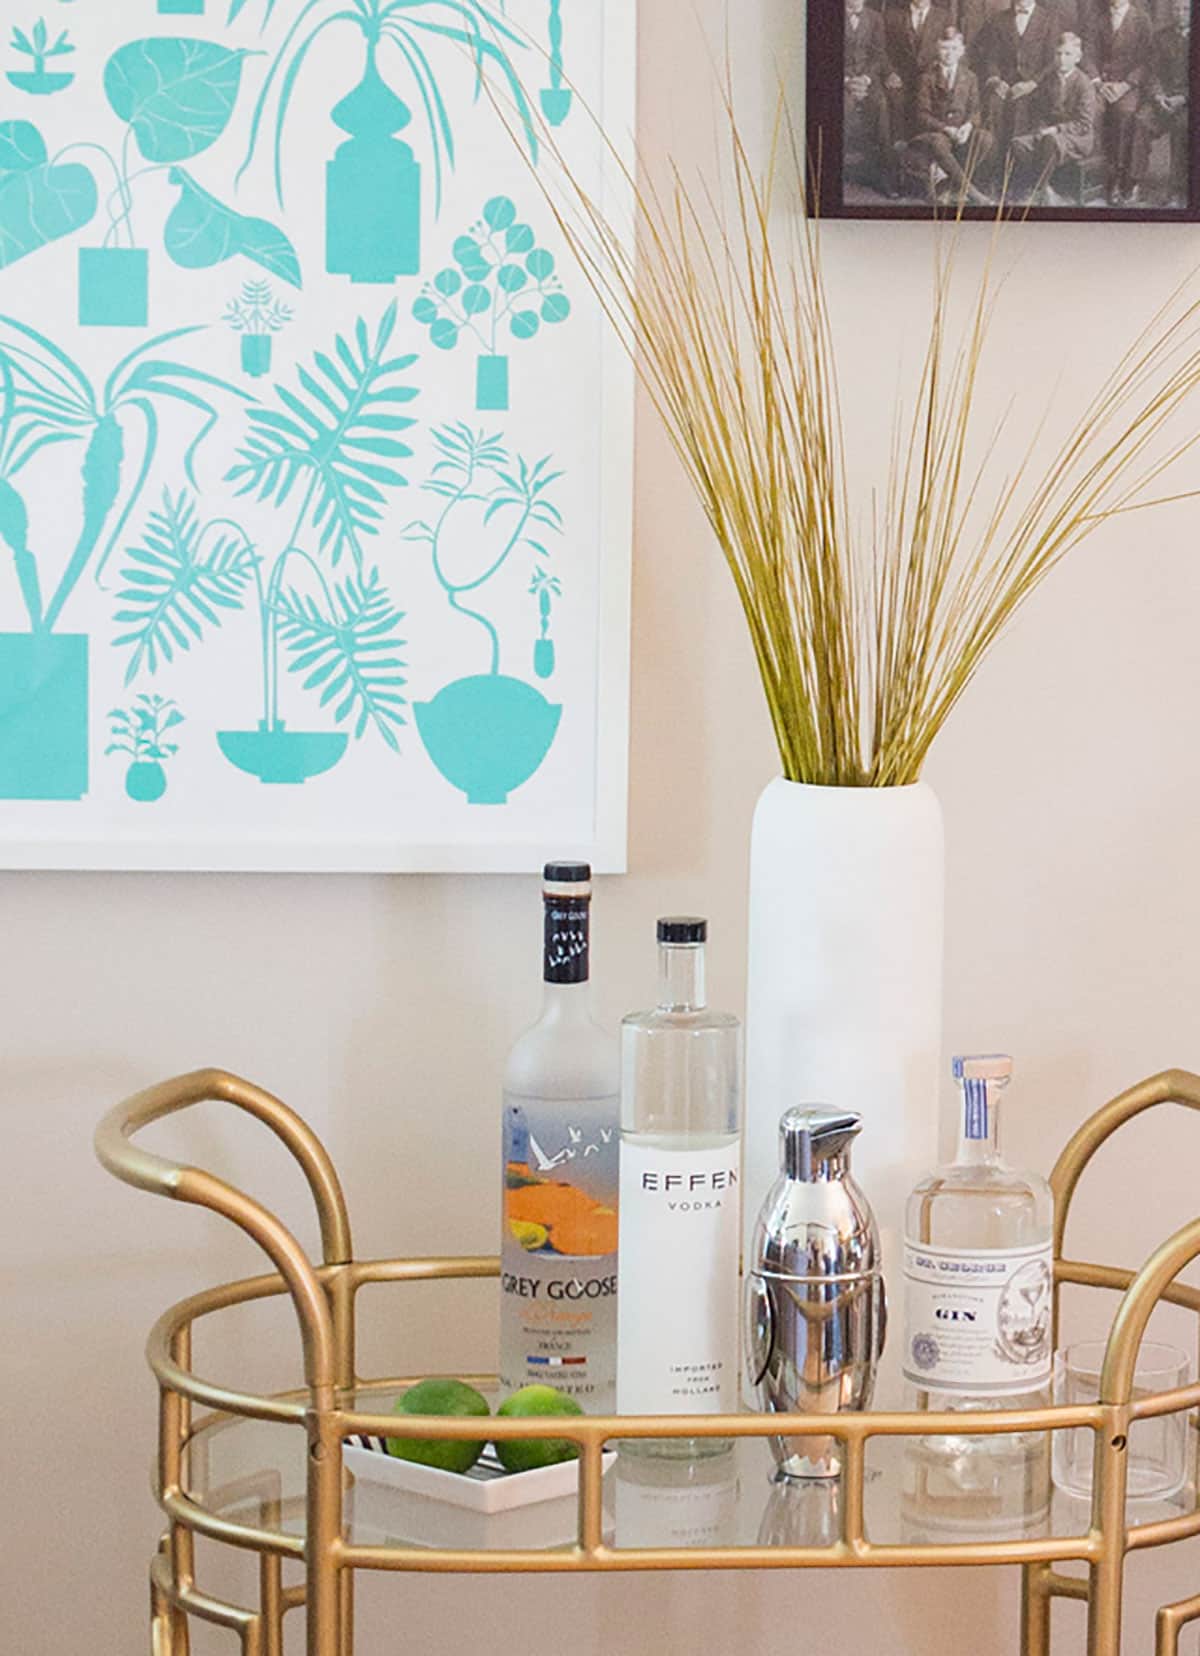 How To Style A Bar Cart - let's style this mid century modern bar cart with our favorite alcohol and a few fun pieces of decor